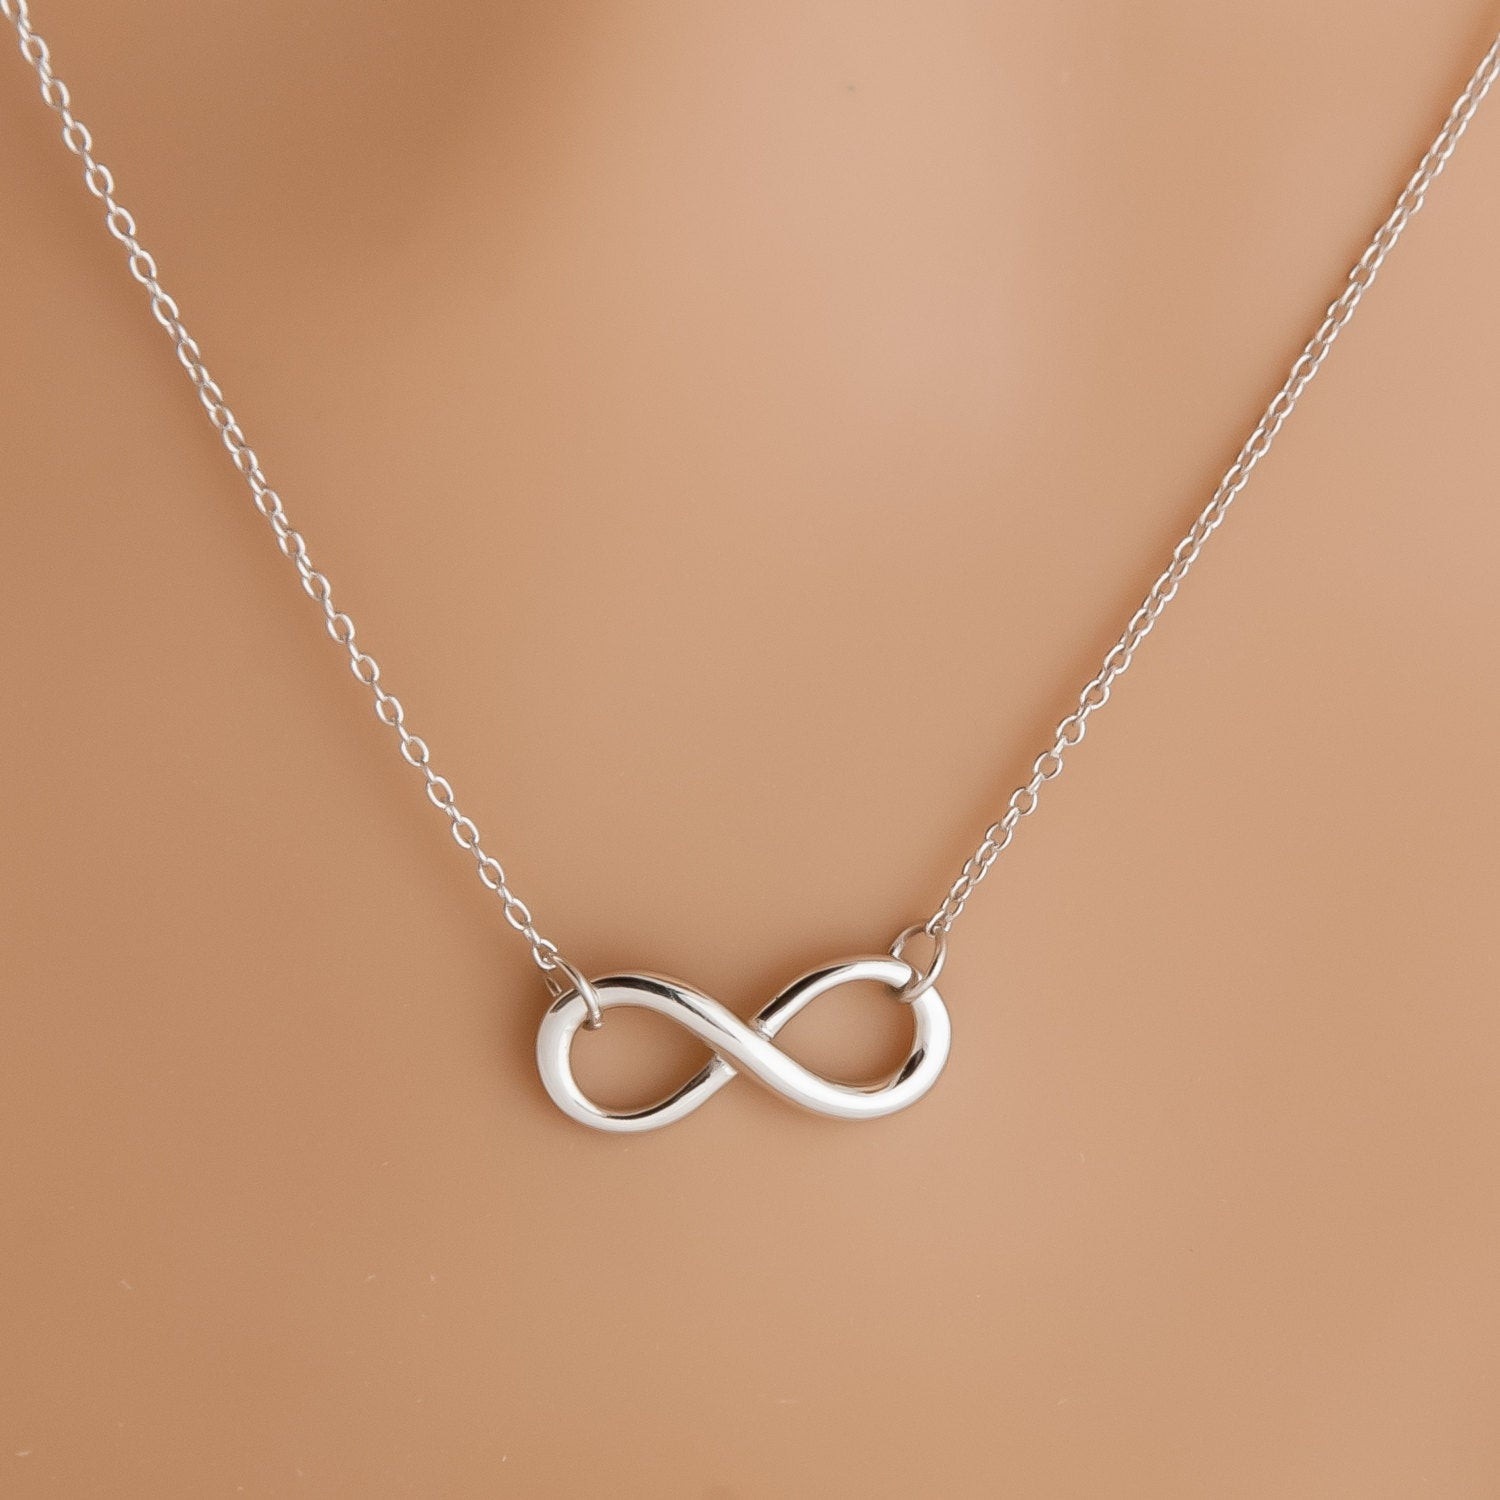 Sterling Silver Infinity Necklace
 INFINITY Necklace 925 Sterling Silver Necklace figure 8 with